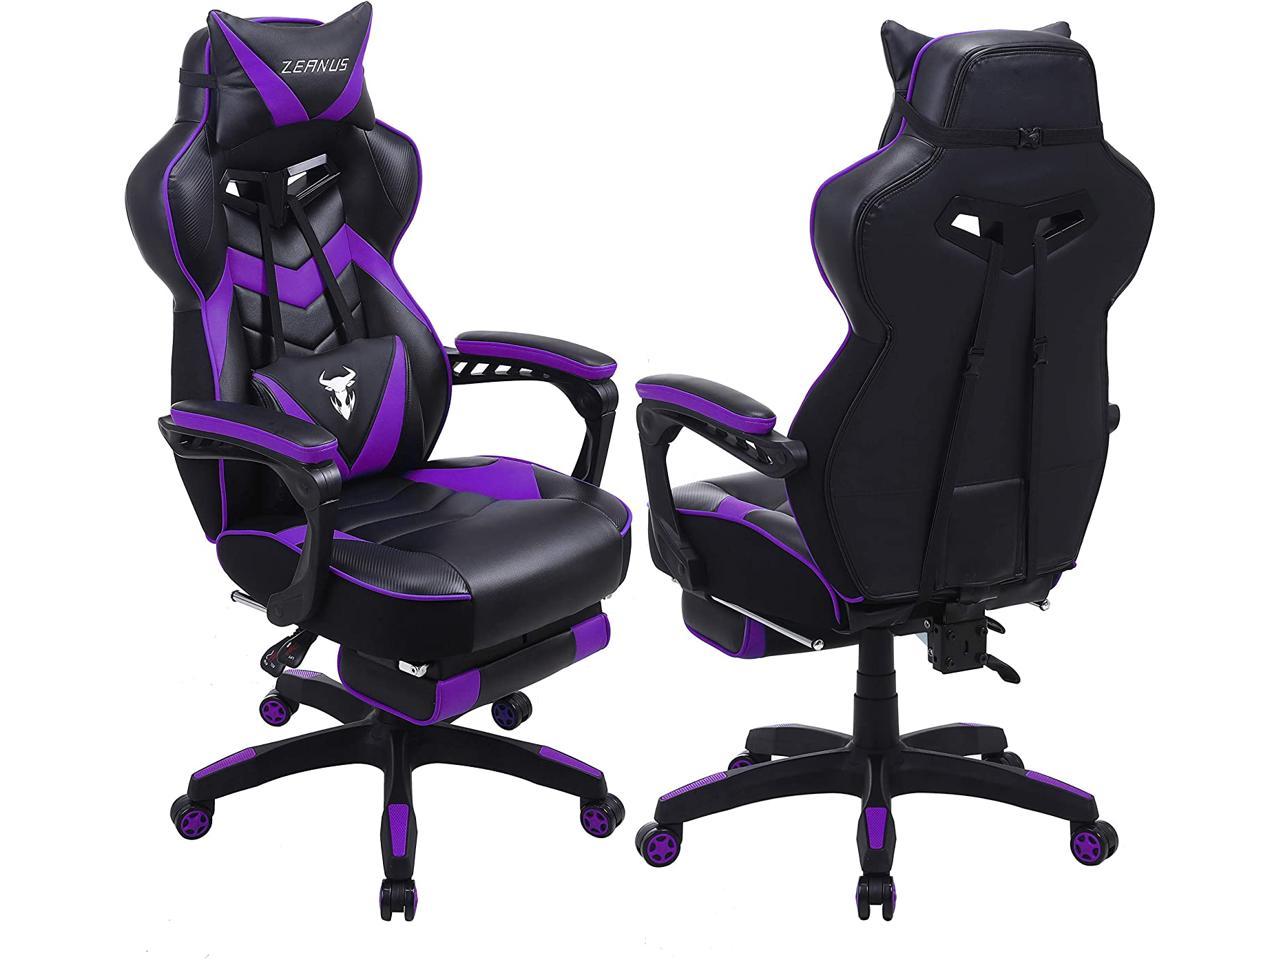 Zeanus Purple Gaming Chair, Reclining Computer Chair with